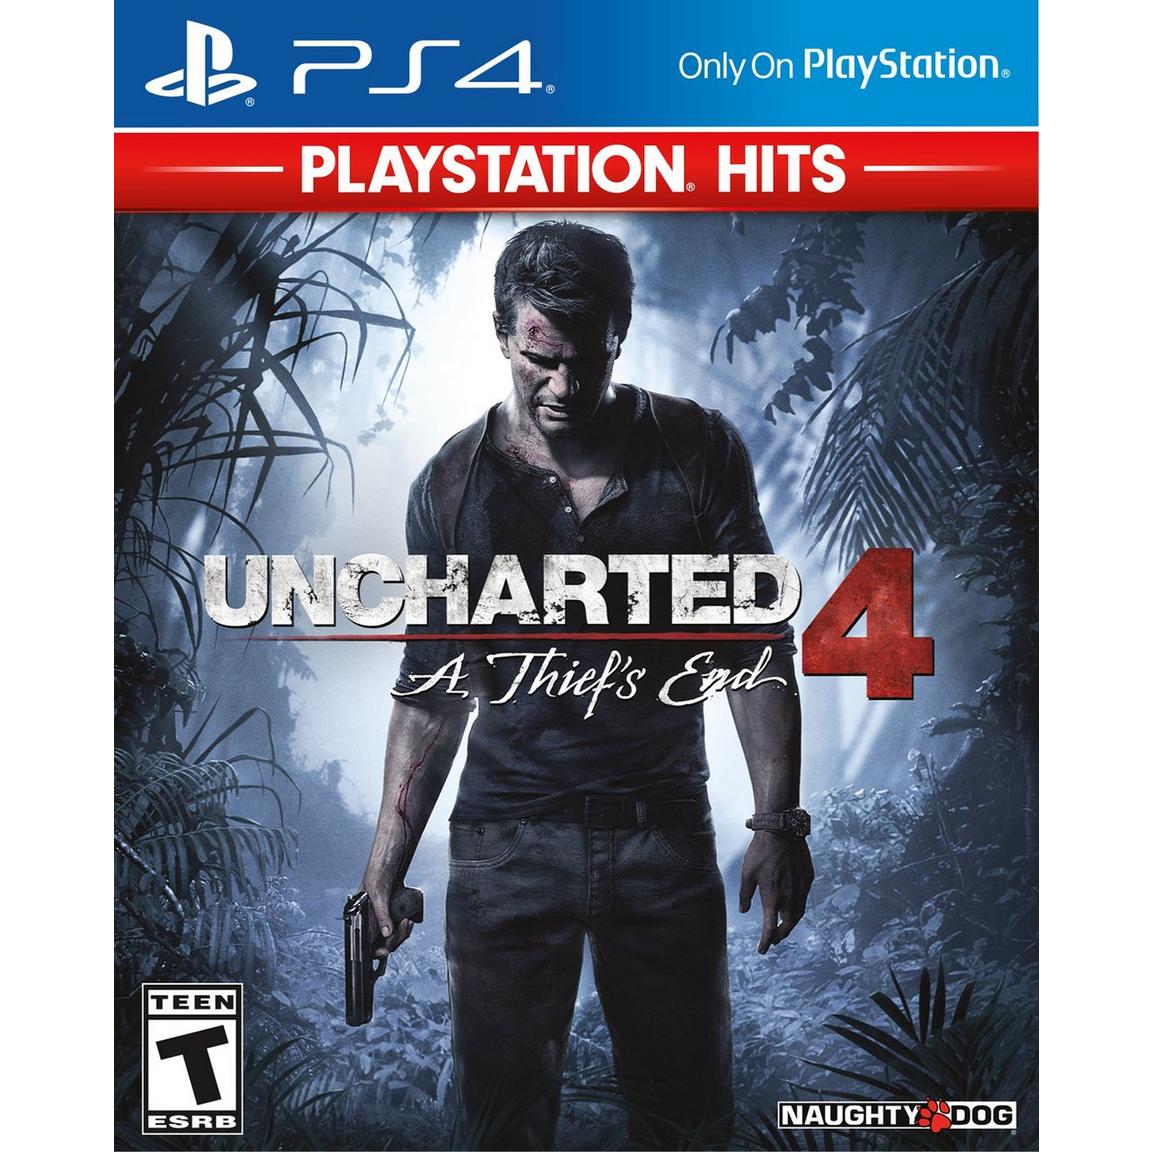 UNCHARTED 4 PS4